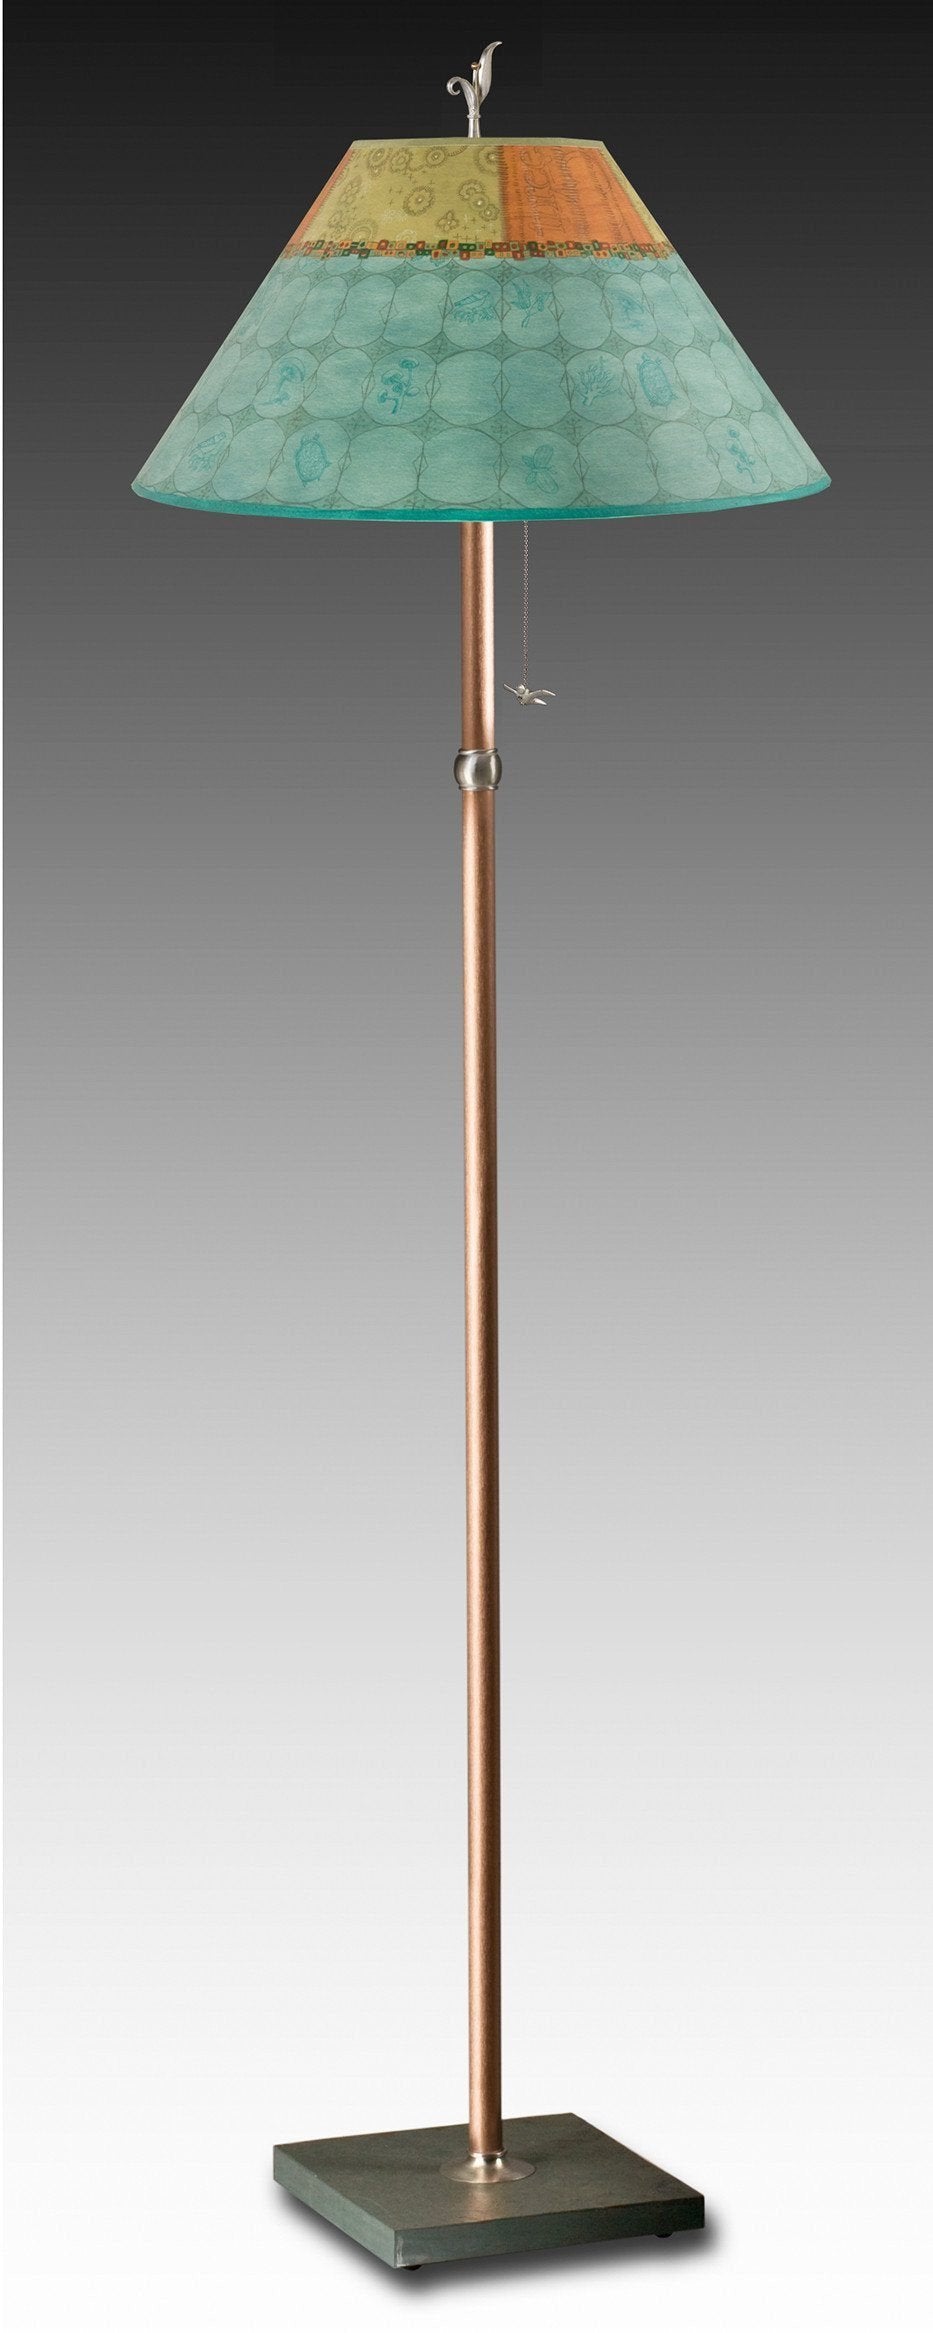 Copper Floor Lamp with Large Conical Shade in Paradise Pool